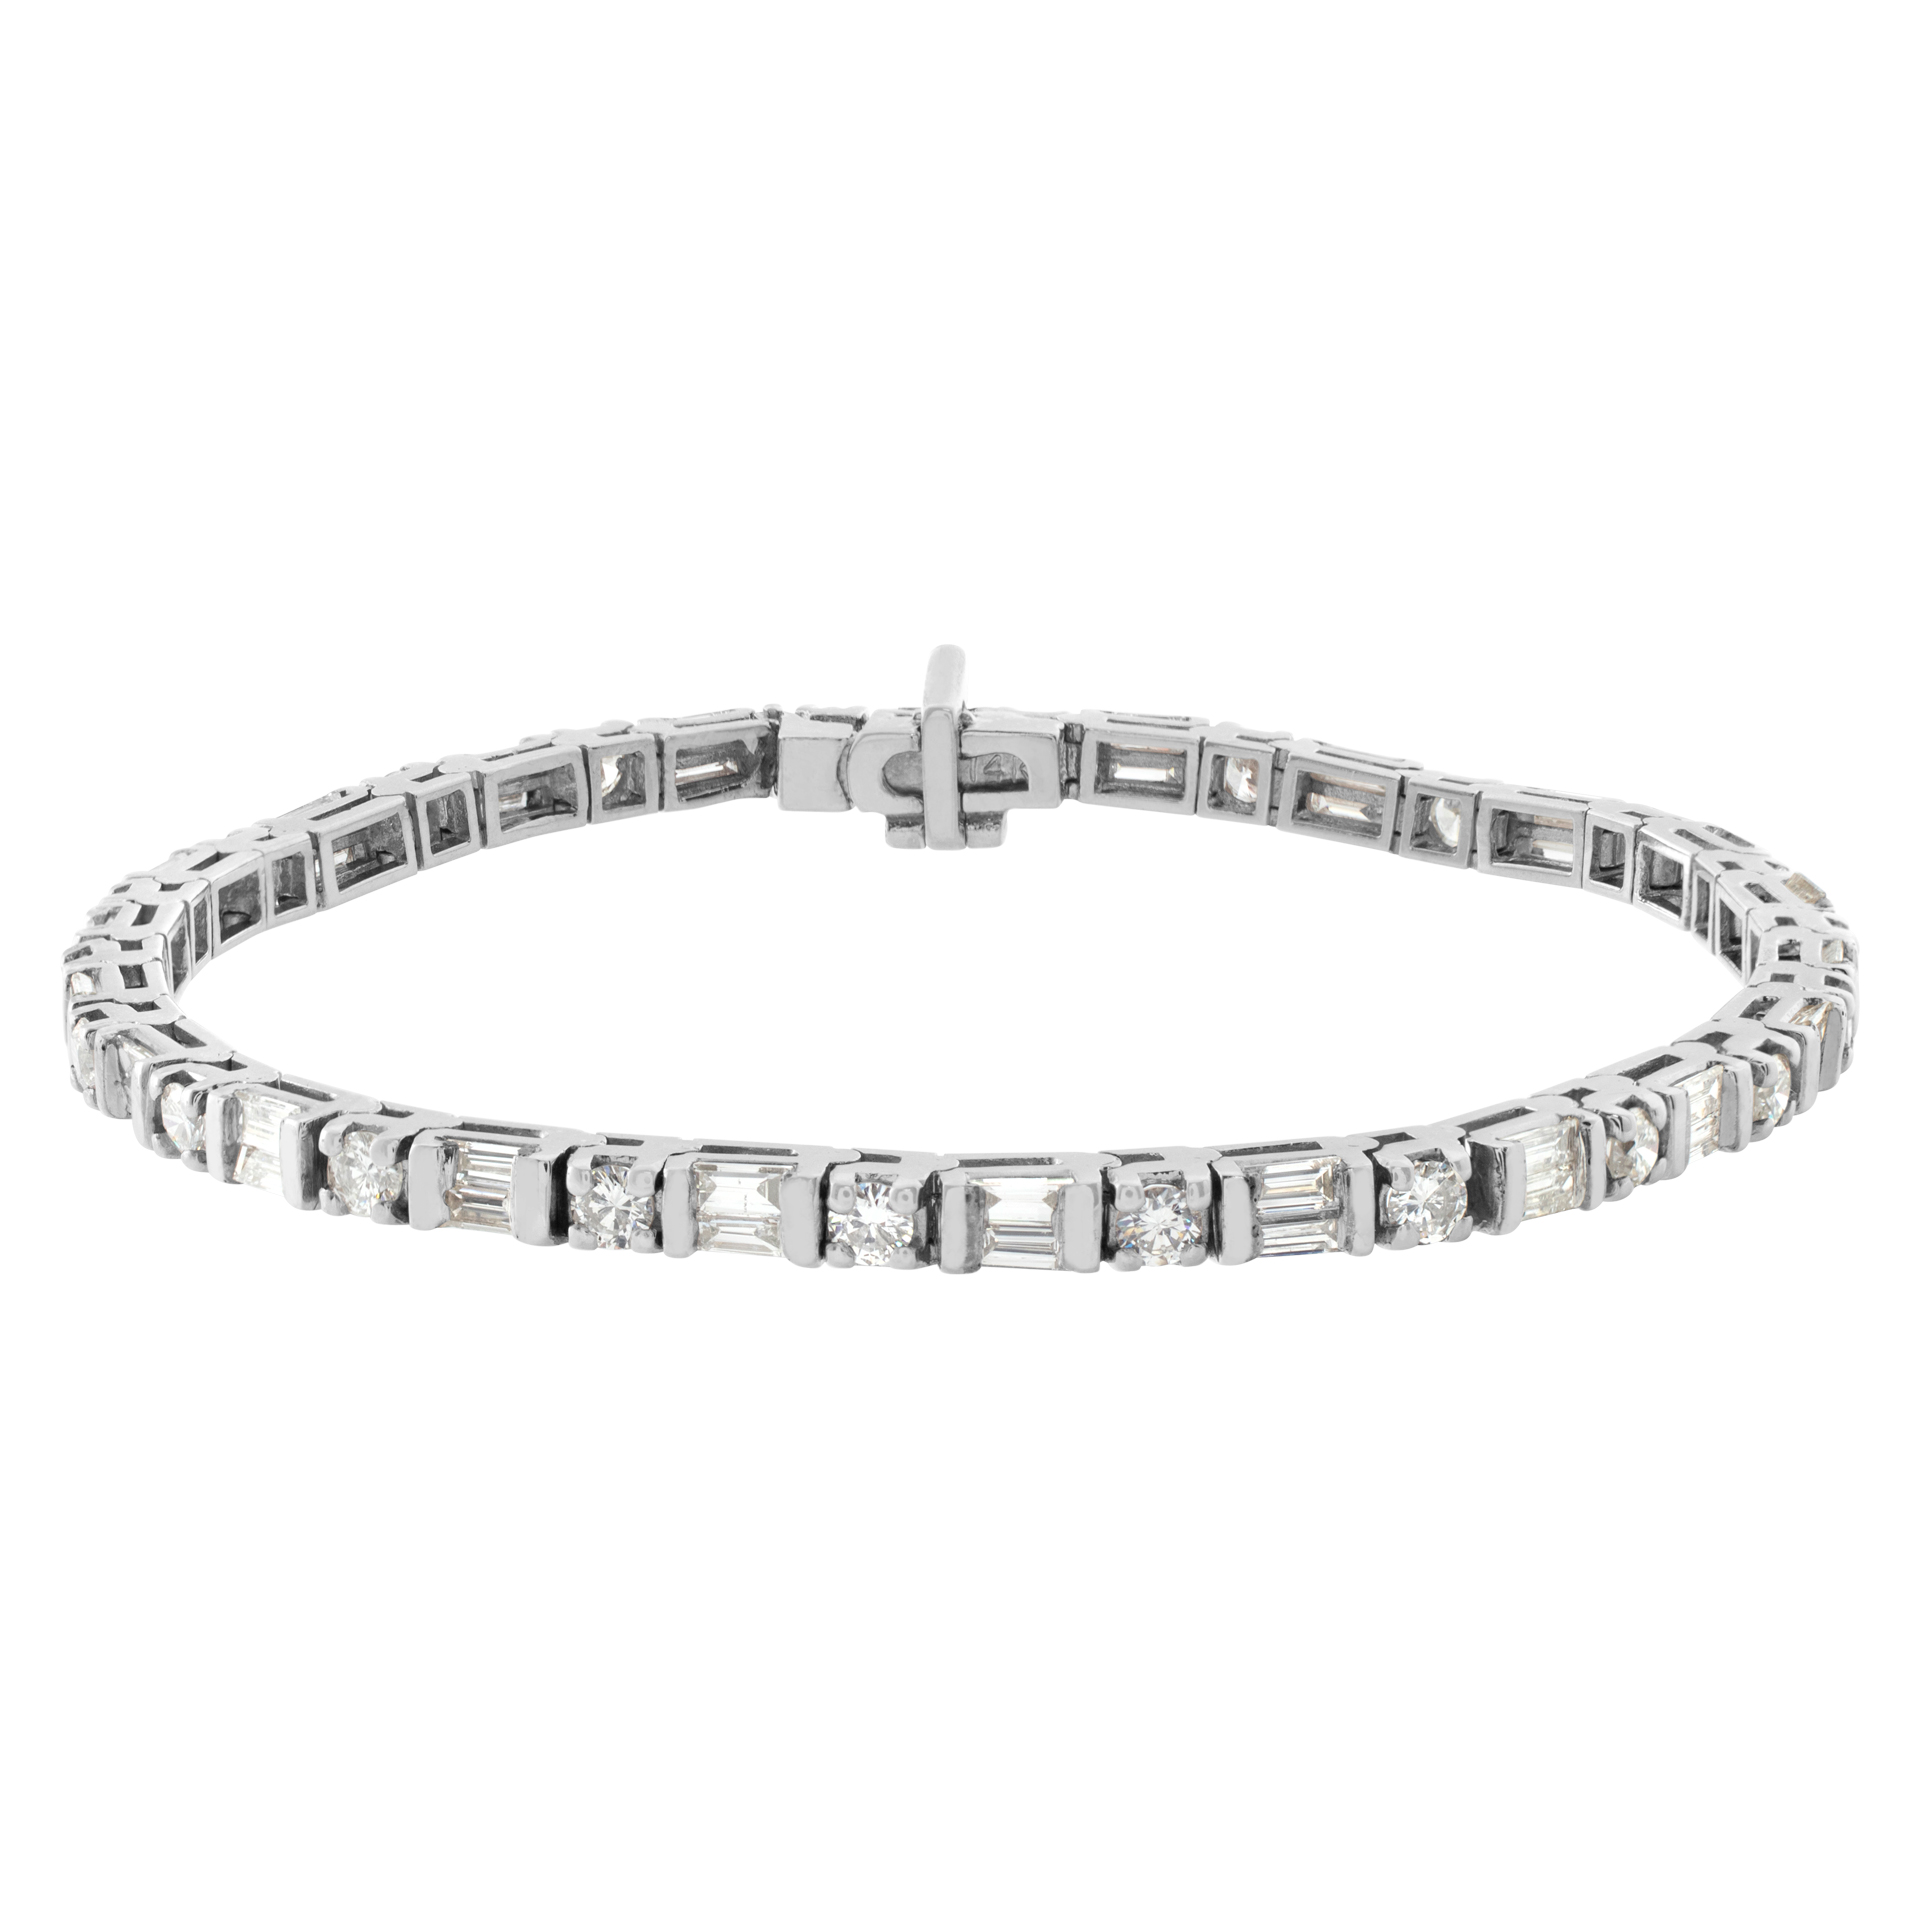 Diamond line bracelet in 14k white gold with 2 carats in round and baguette cut diamonds